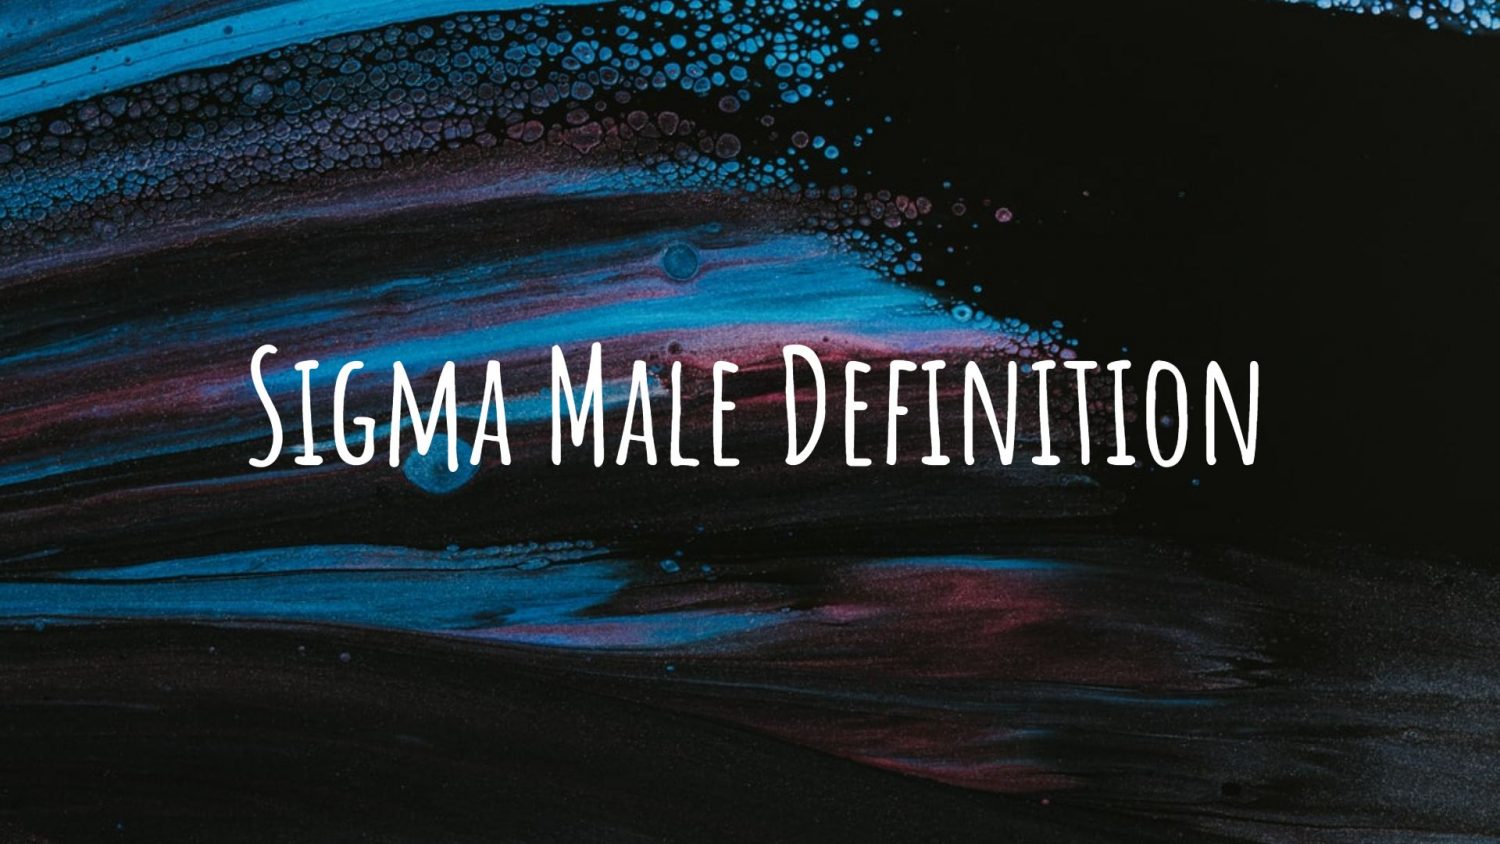 sigma male meaning in english